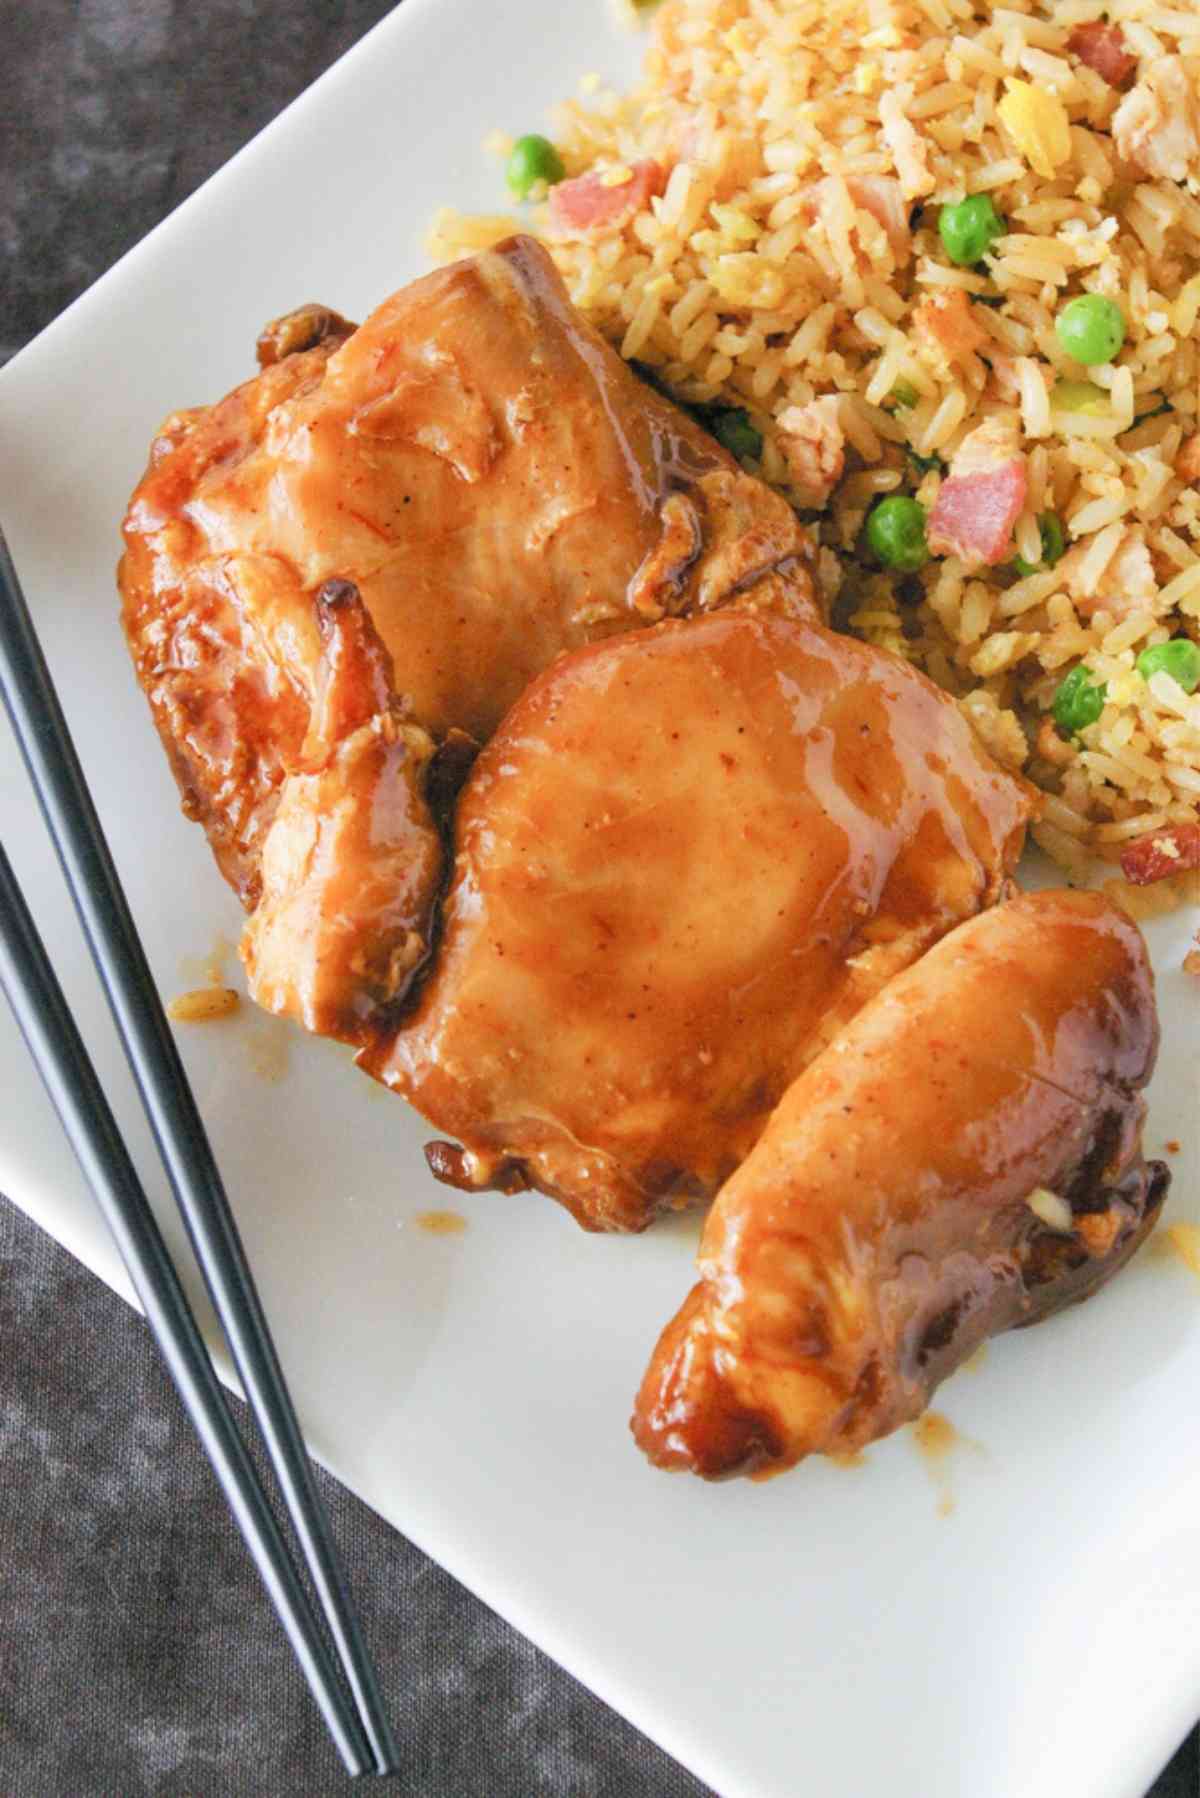 Plate of honey barbecue chicken with fried rice!